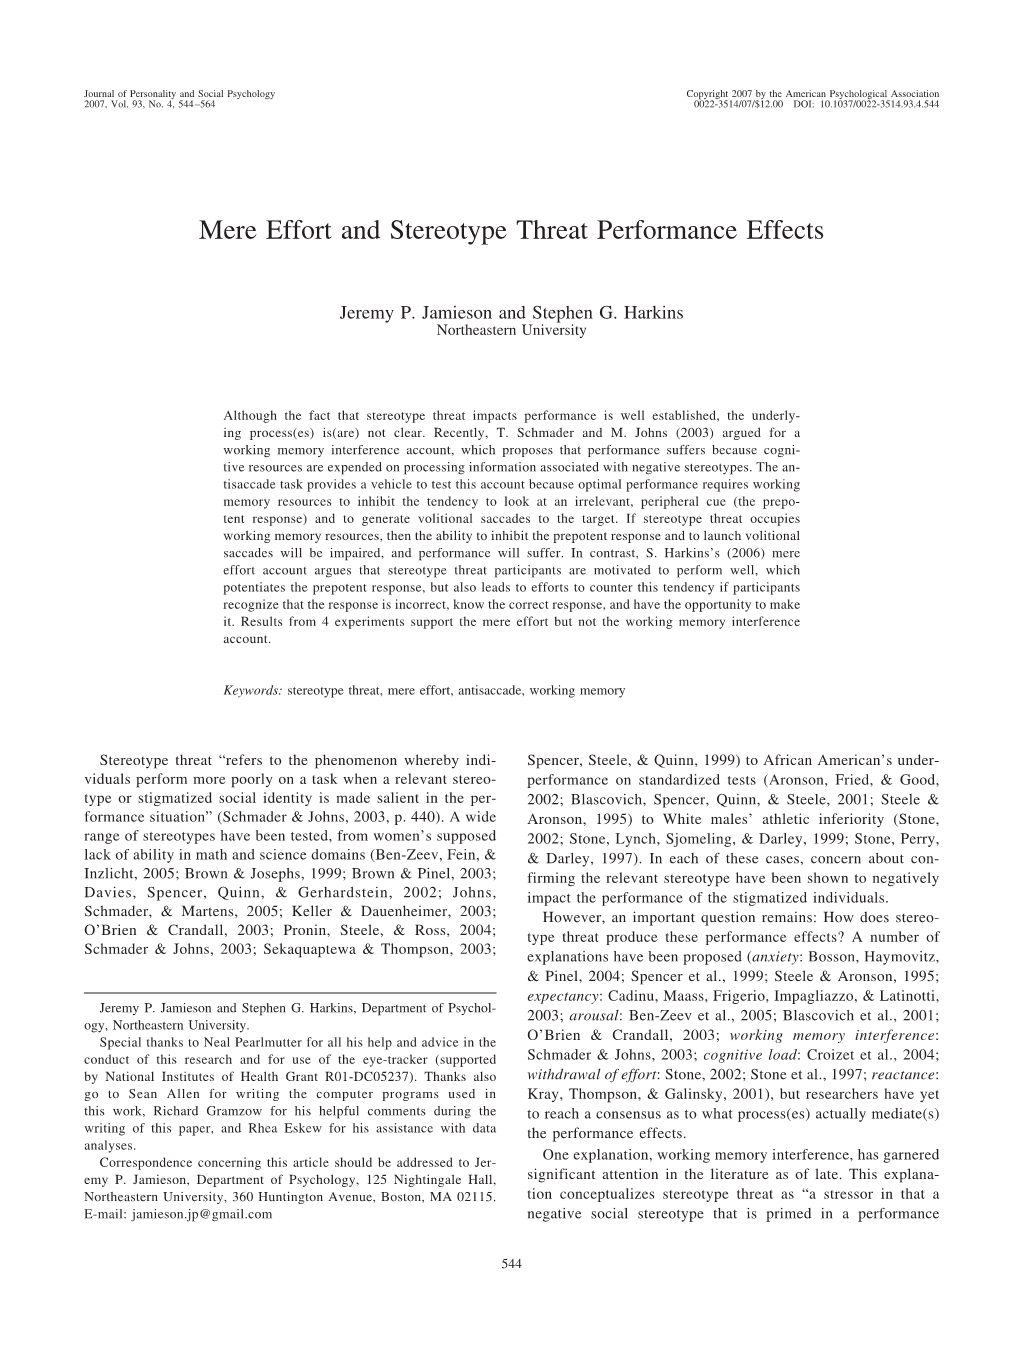 Mere Effort and Stereotype Threat Performance Effects